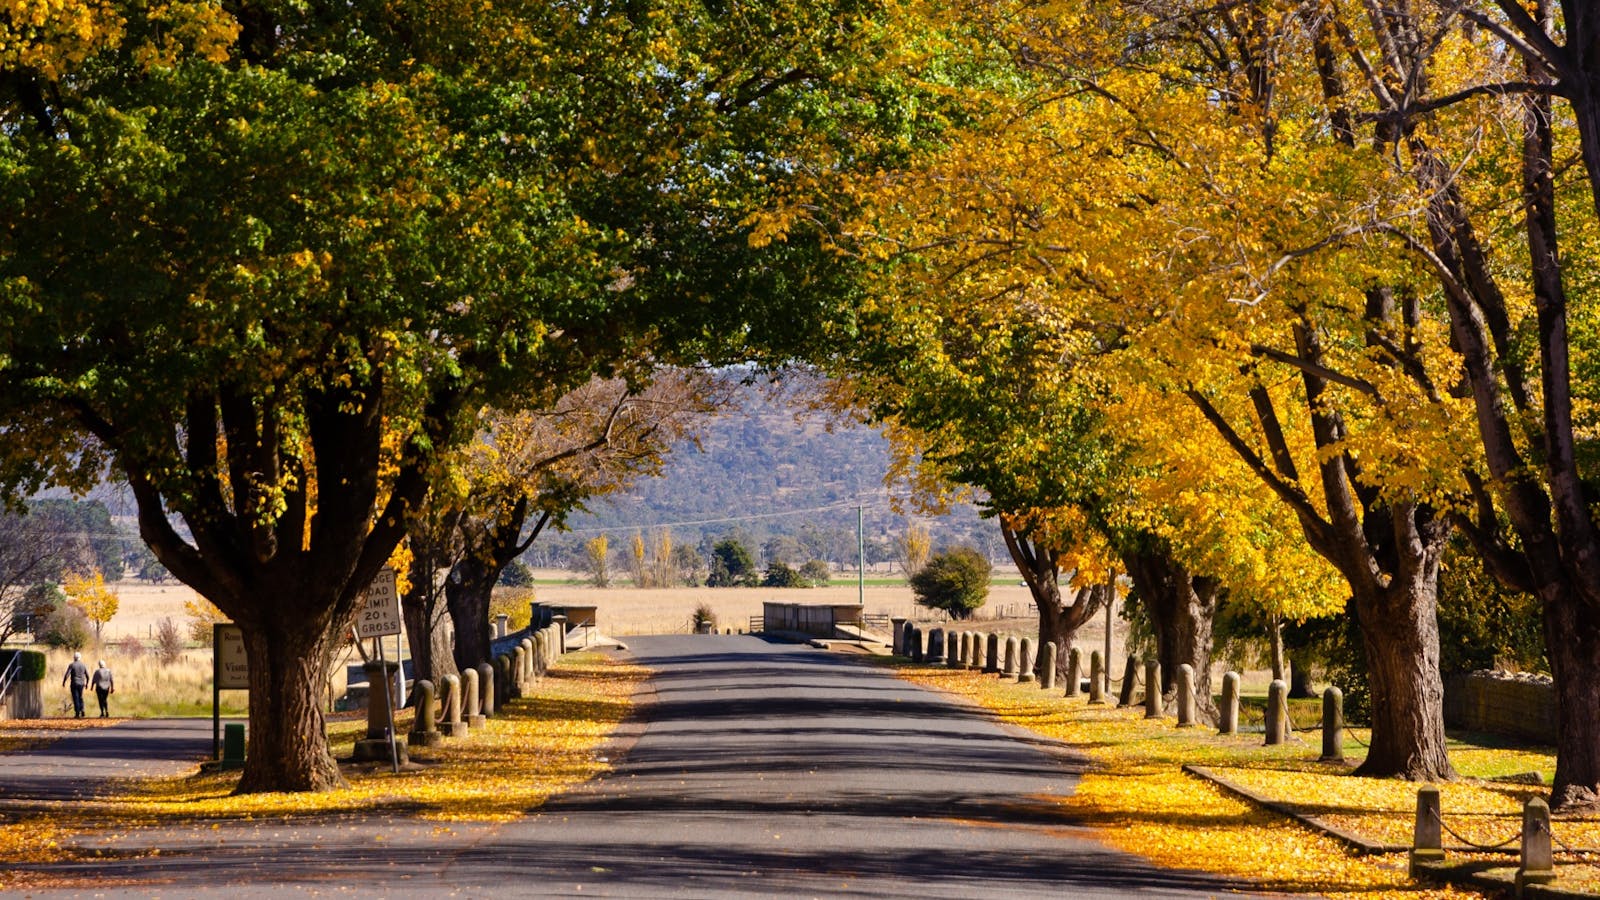 Experience the colonial history of Tasmania's Midlands on your Lap of Tasmania road trip